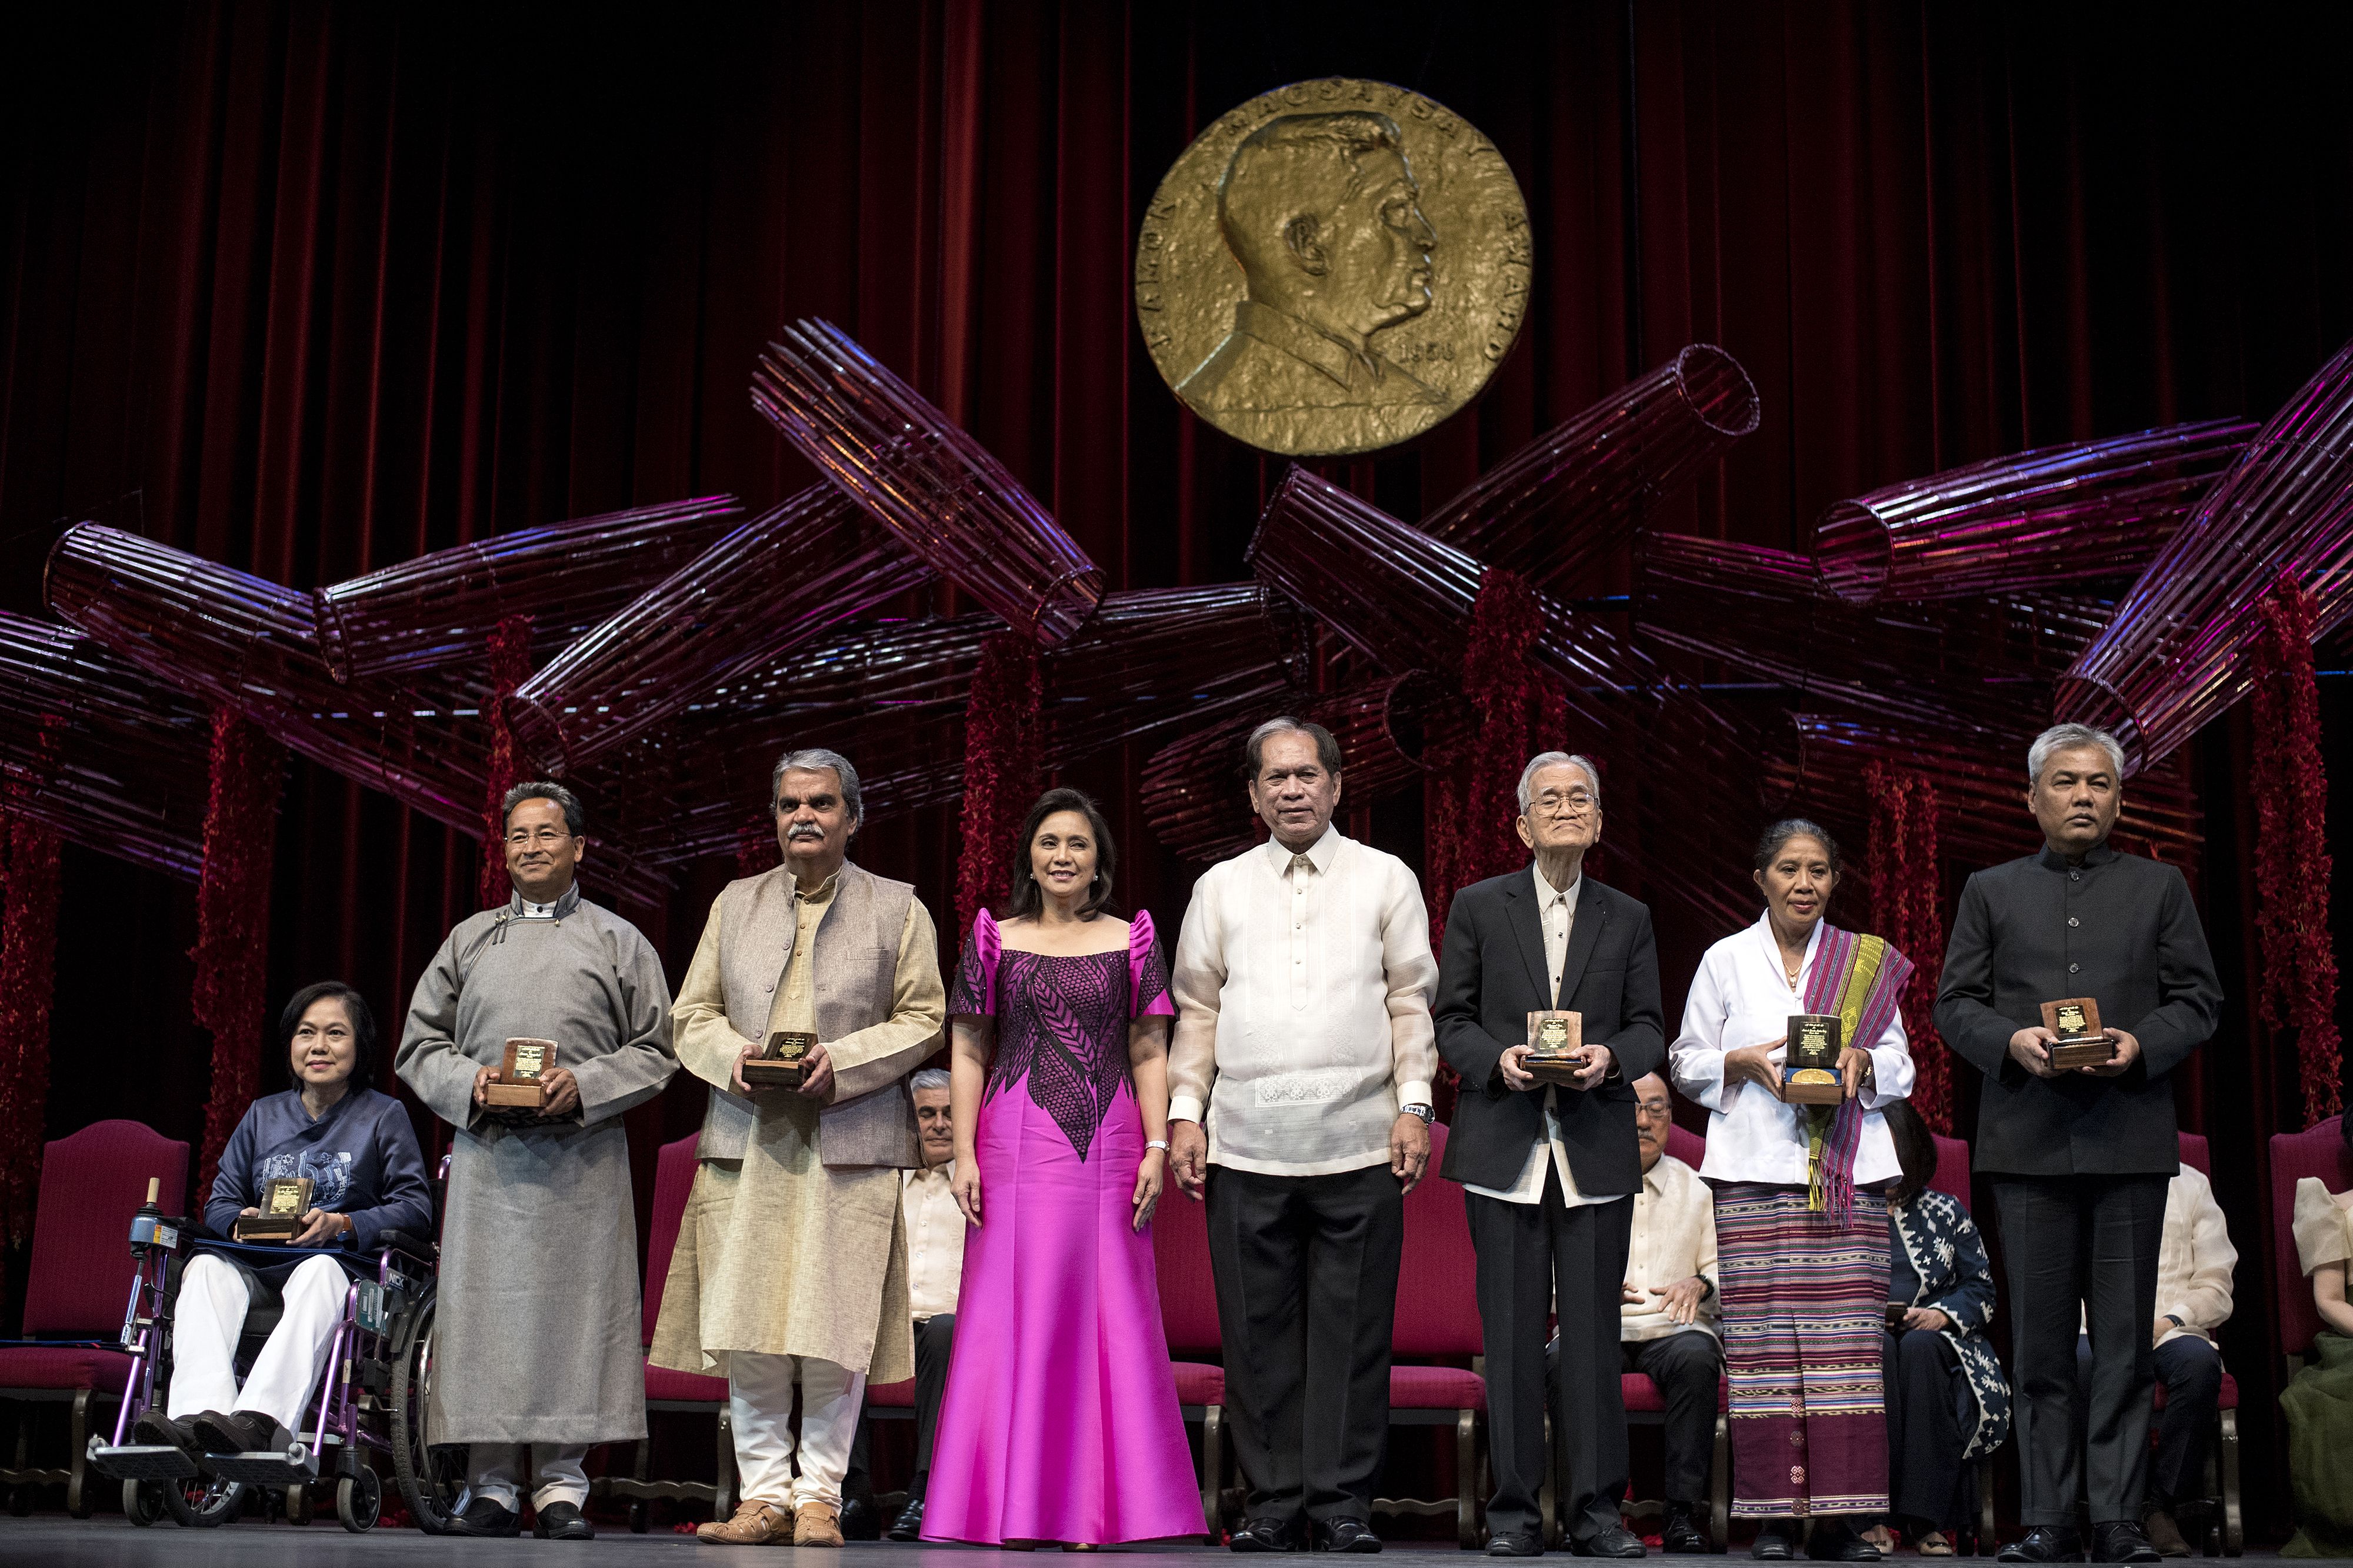 The 2018 Ramon Magsaysay Awardees, including, third form left, Bharat Vatwani of India, at the Cultural Center of the Philippines in Manila on August 31, 2018. (NOEL CELIS—AFP/Getty Images)